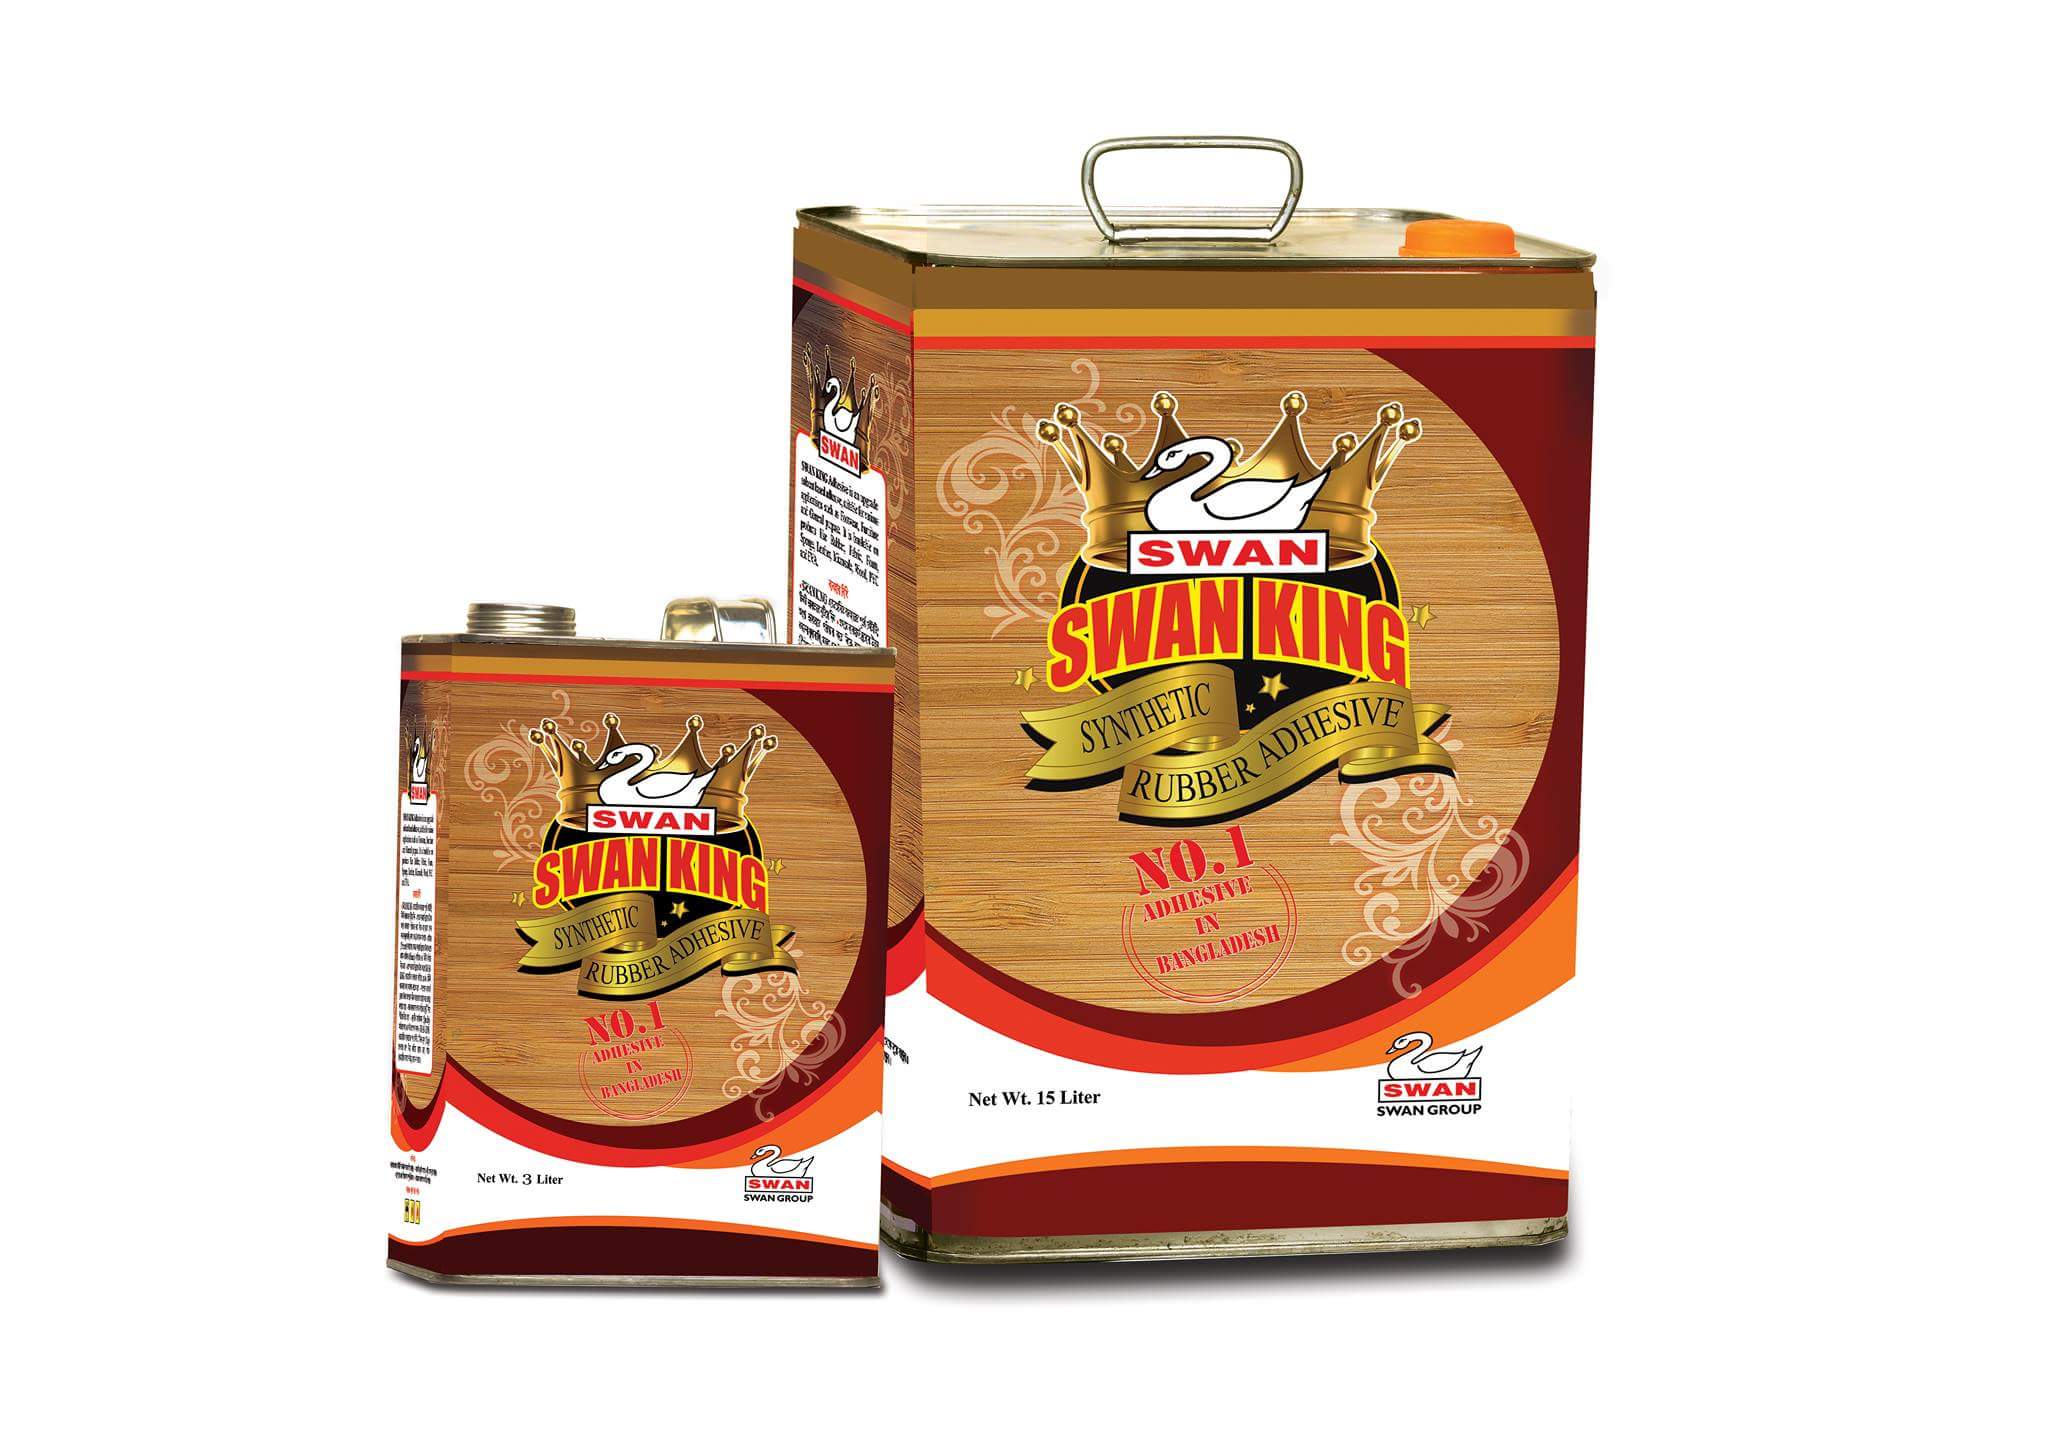 Swan King Synthetic Rubber (SR) Adhesive